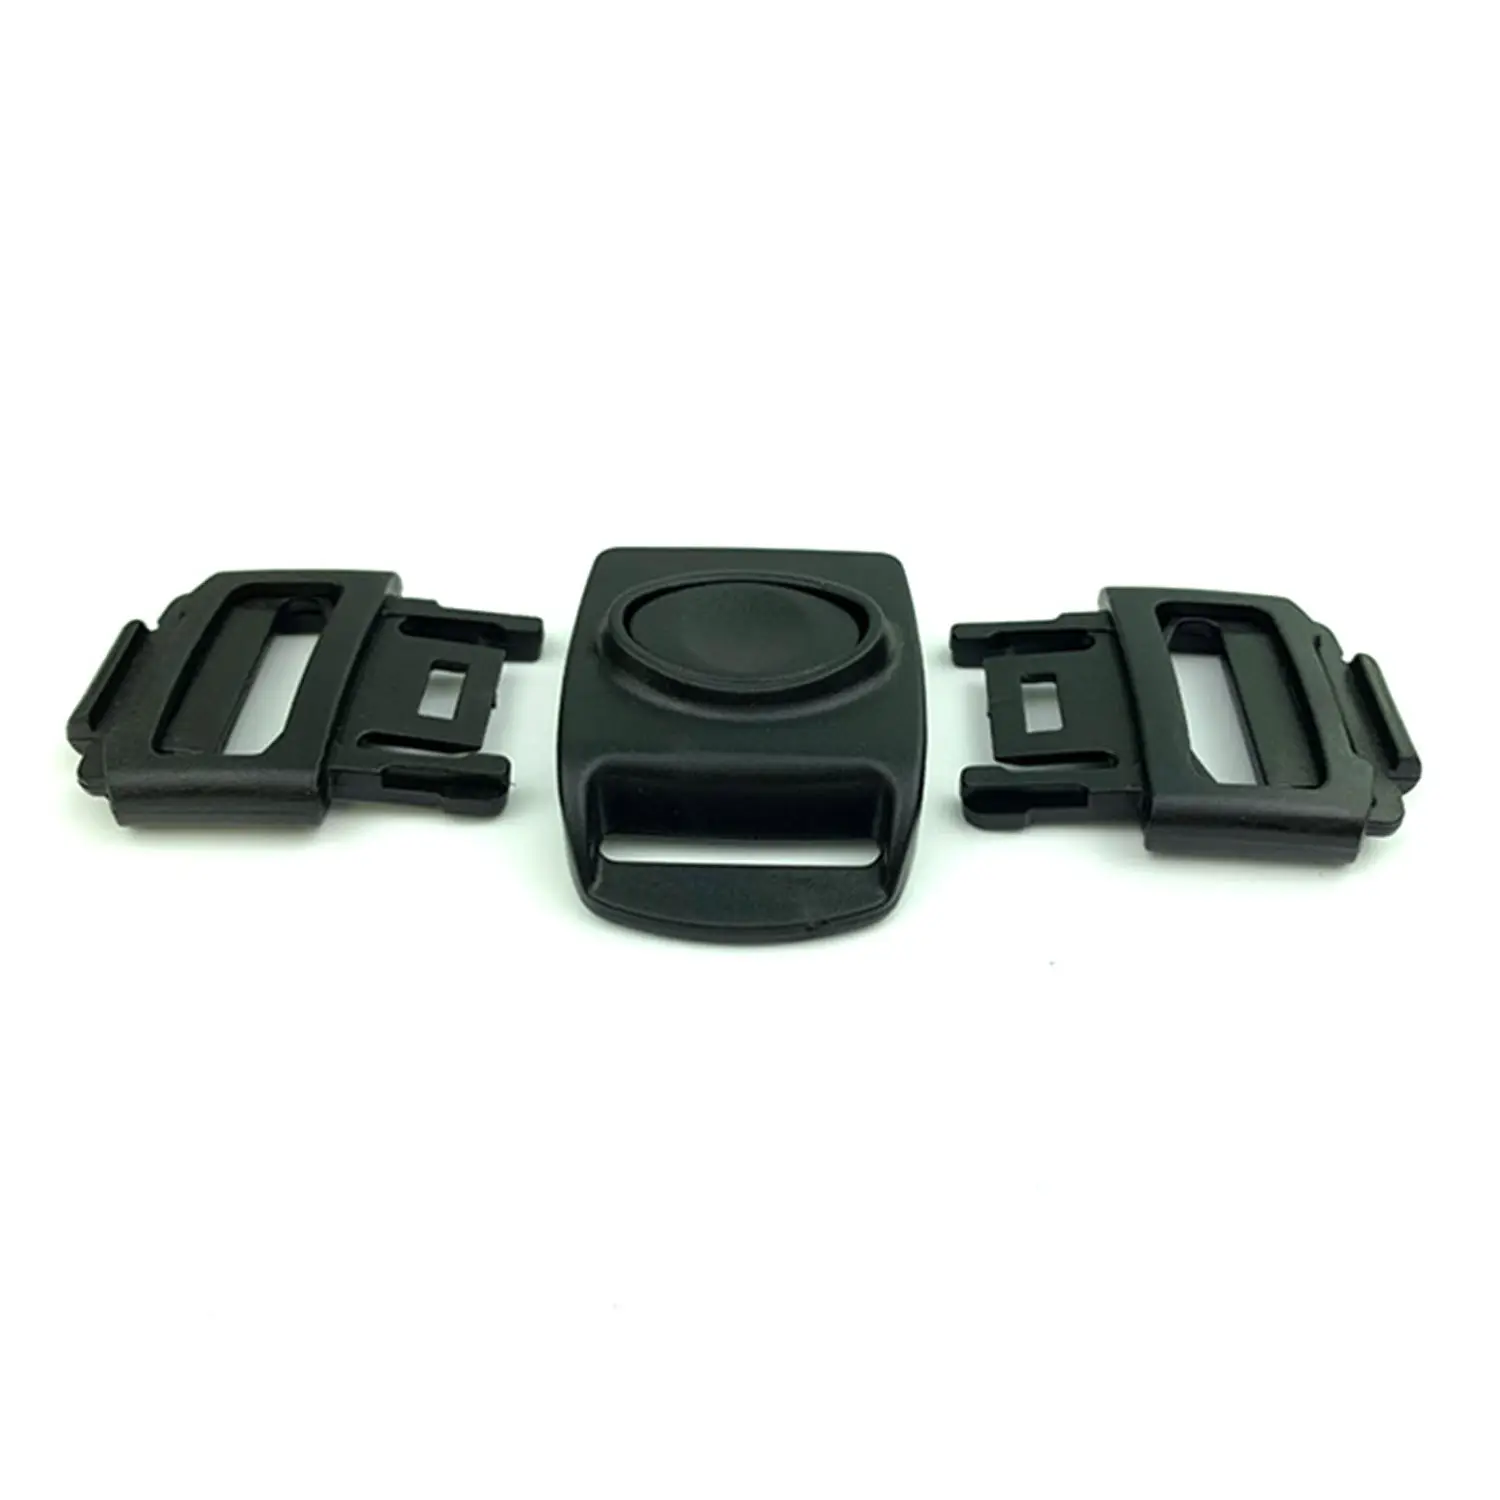 Made in China wholesale cheap 3 way center release buckles 25mm 1 inch strap buckle for stroller